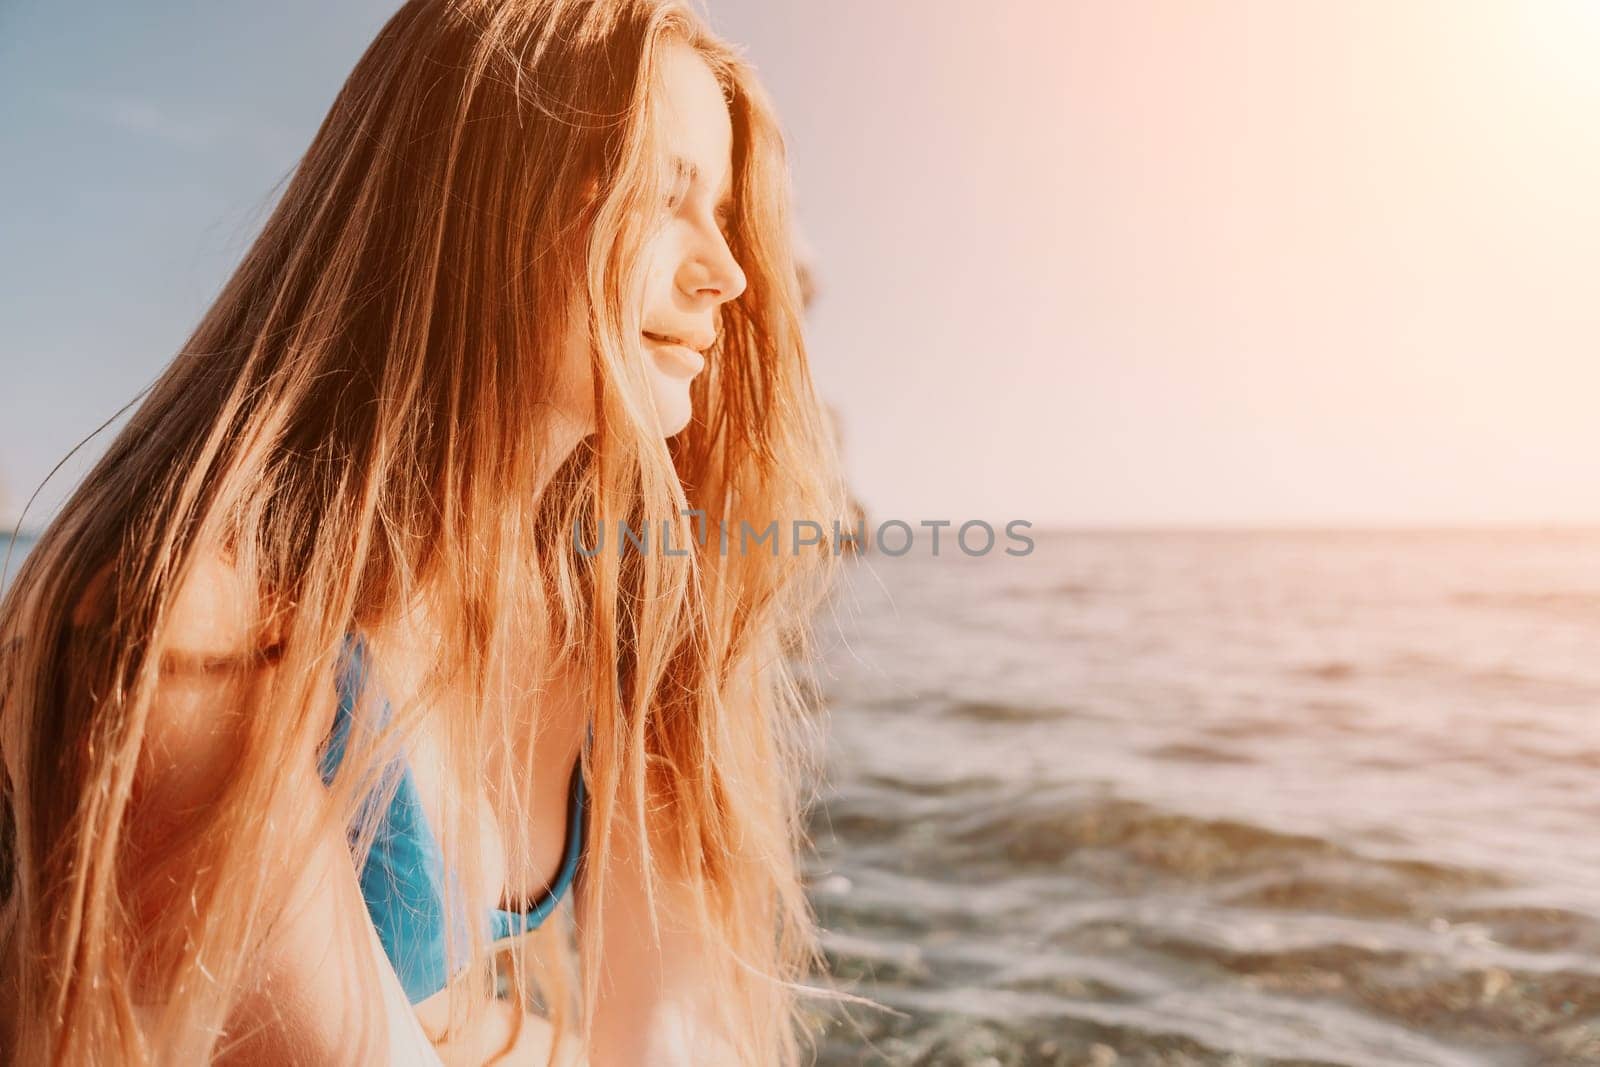 Woman sea sup. Close up portrait of happy young caucasian woman with long hair looking at camera and smiling. Cute woman portrait in a blue bikini posing on sup board in the sea by panophotograph